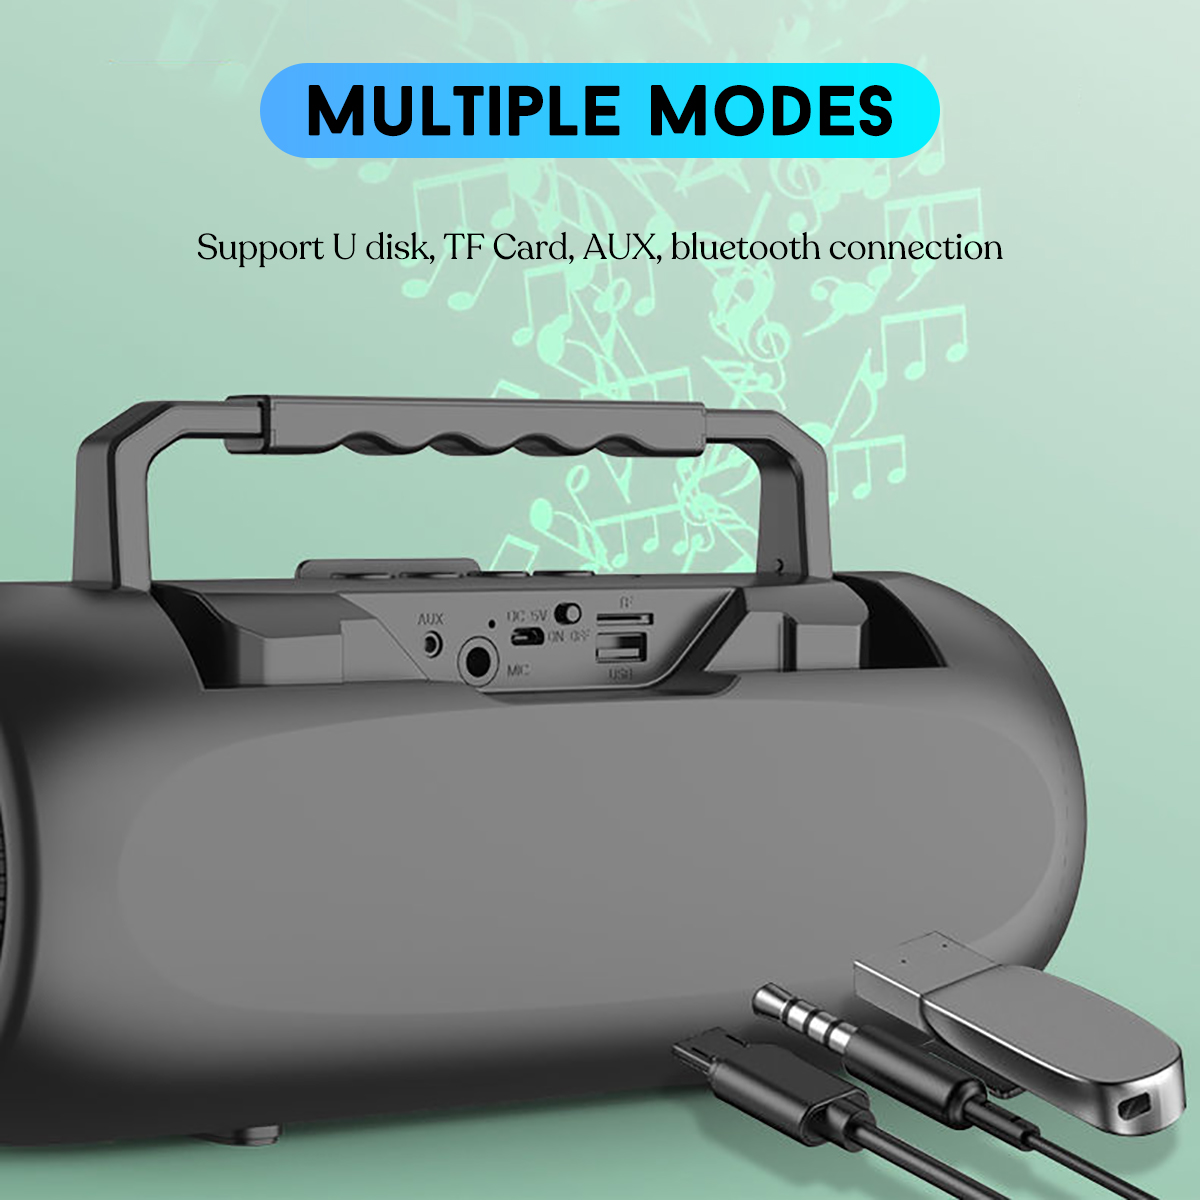 10W-Wireless-bluetooth-Speaker-LED-Portable-Amplifier-Subwoofer-Boombox-FM-Radio-TF-Card-USB-Outdoor-1931993-6